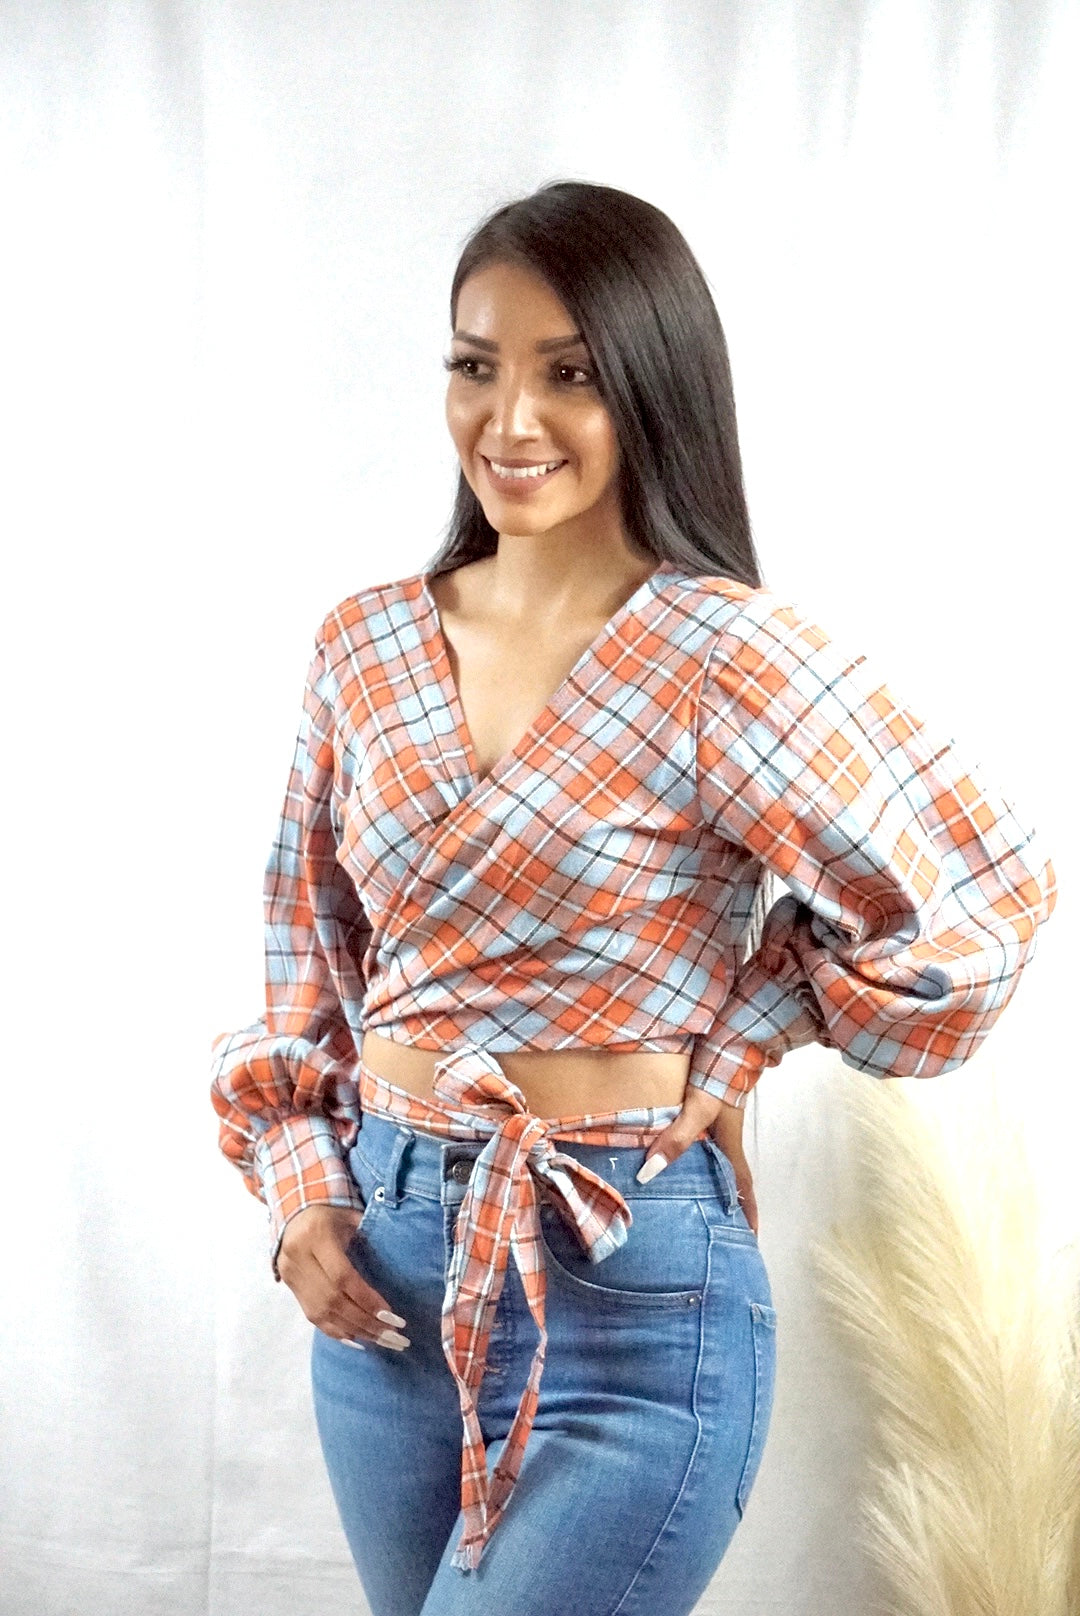 Mad for Plaid Top